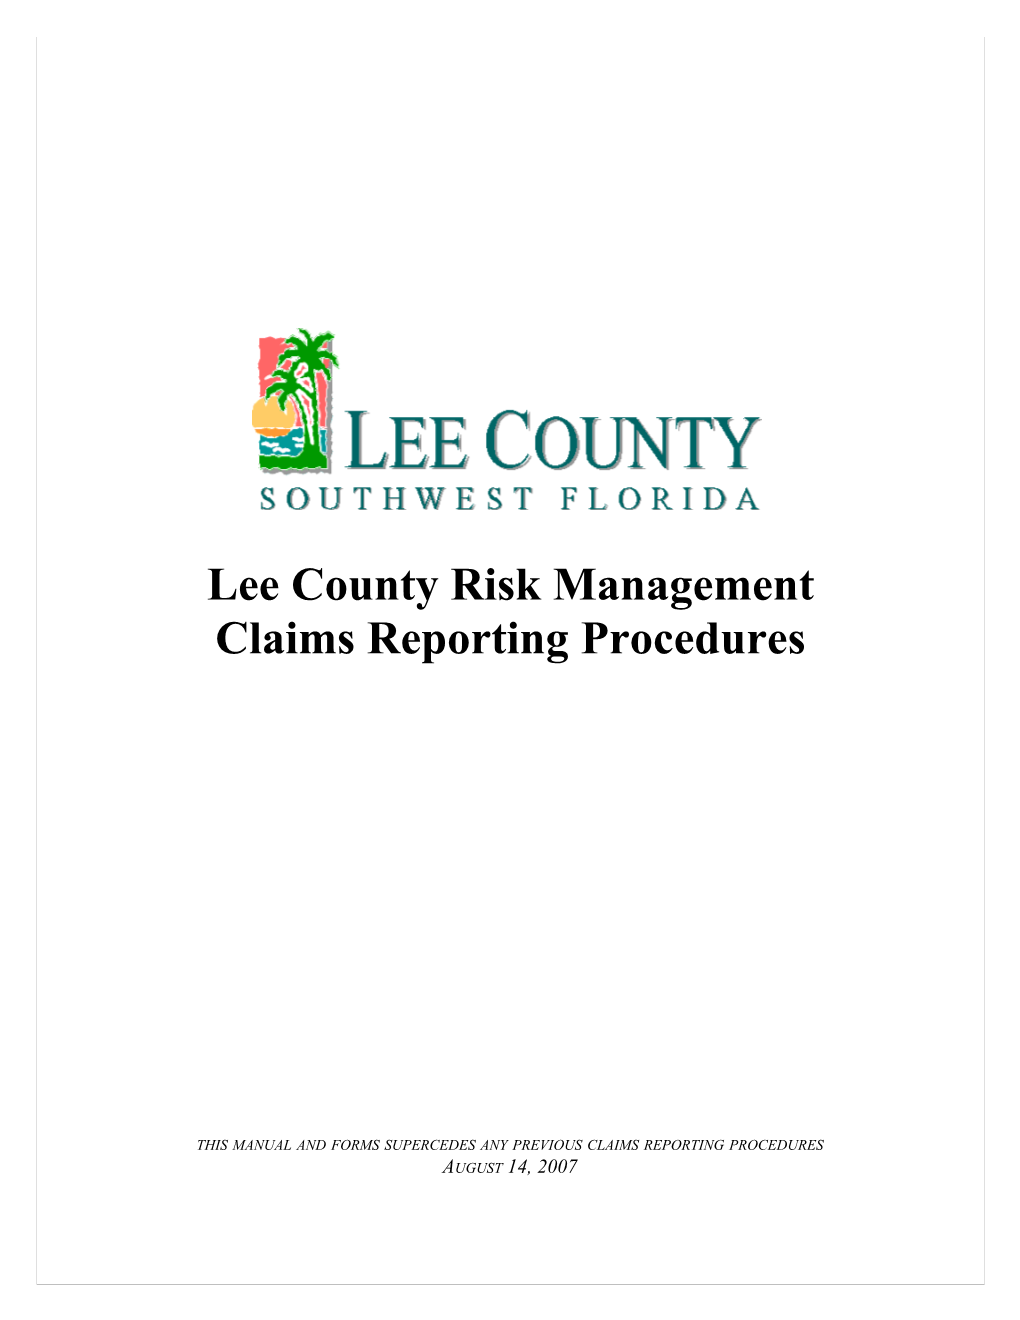 Instructions for Reporting Claims